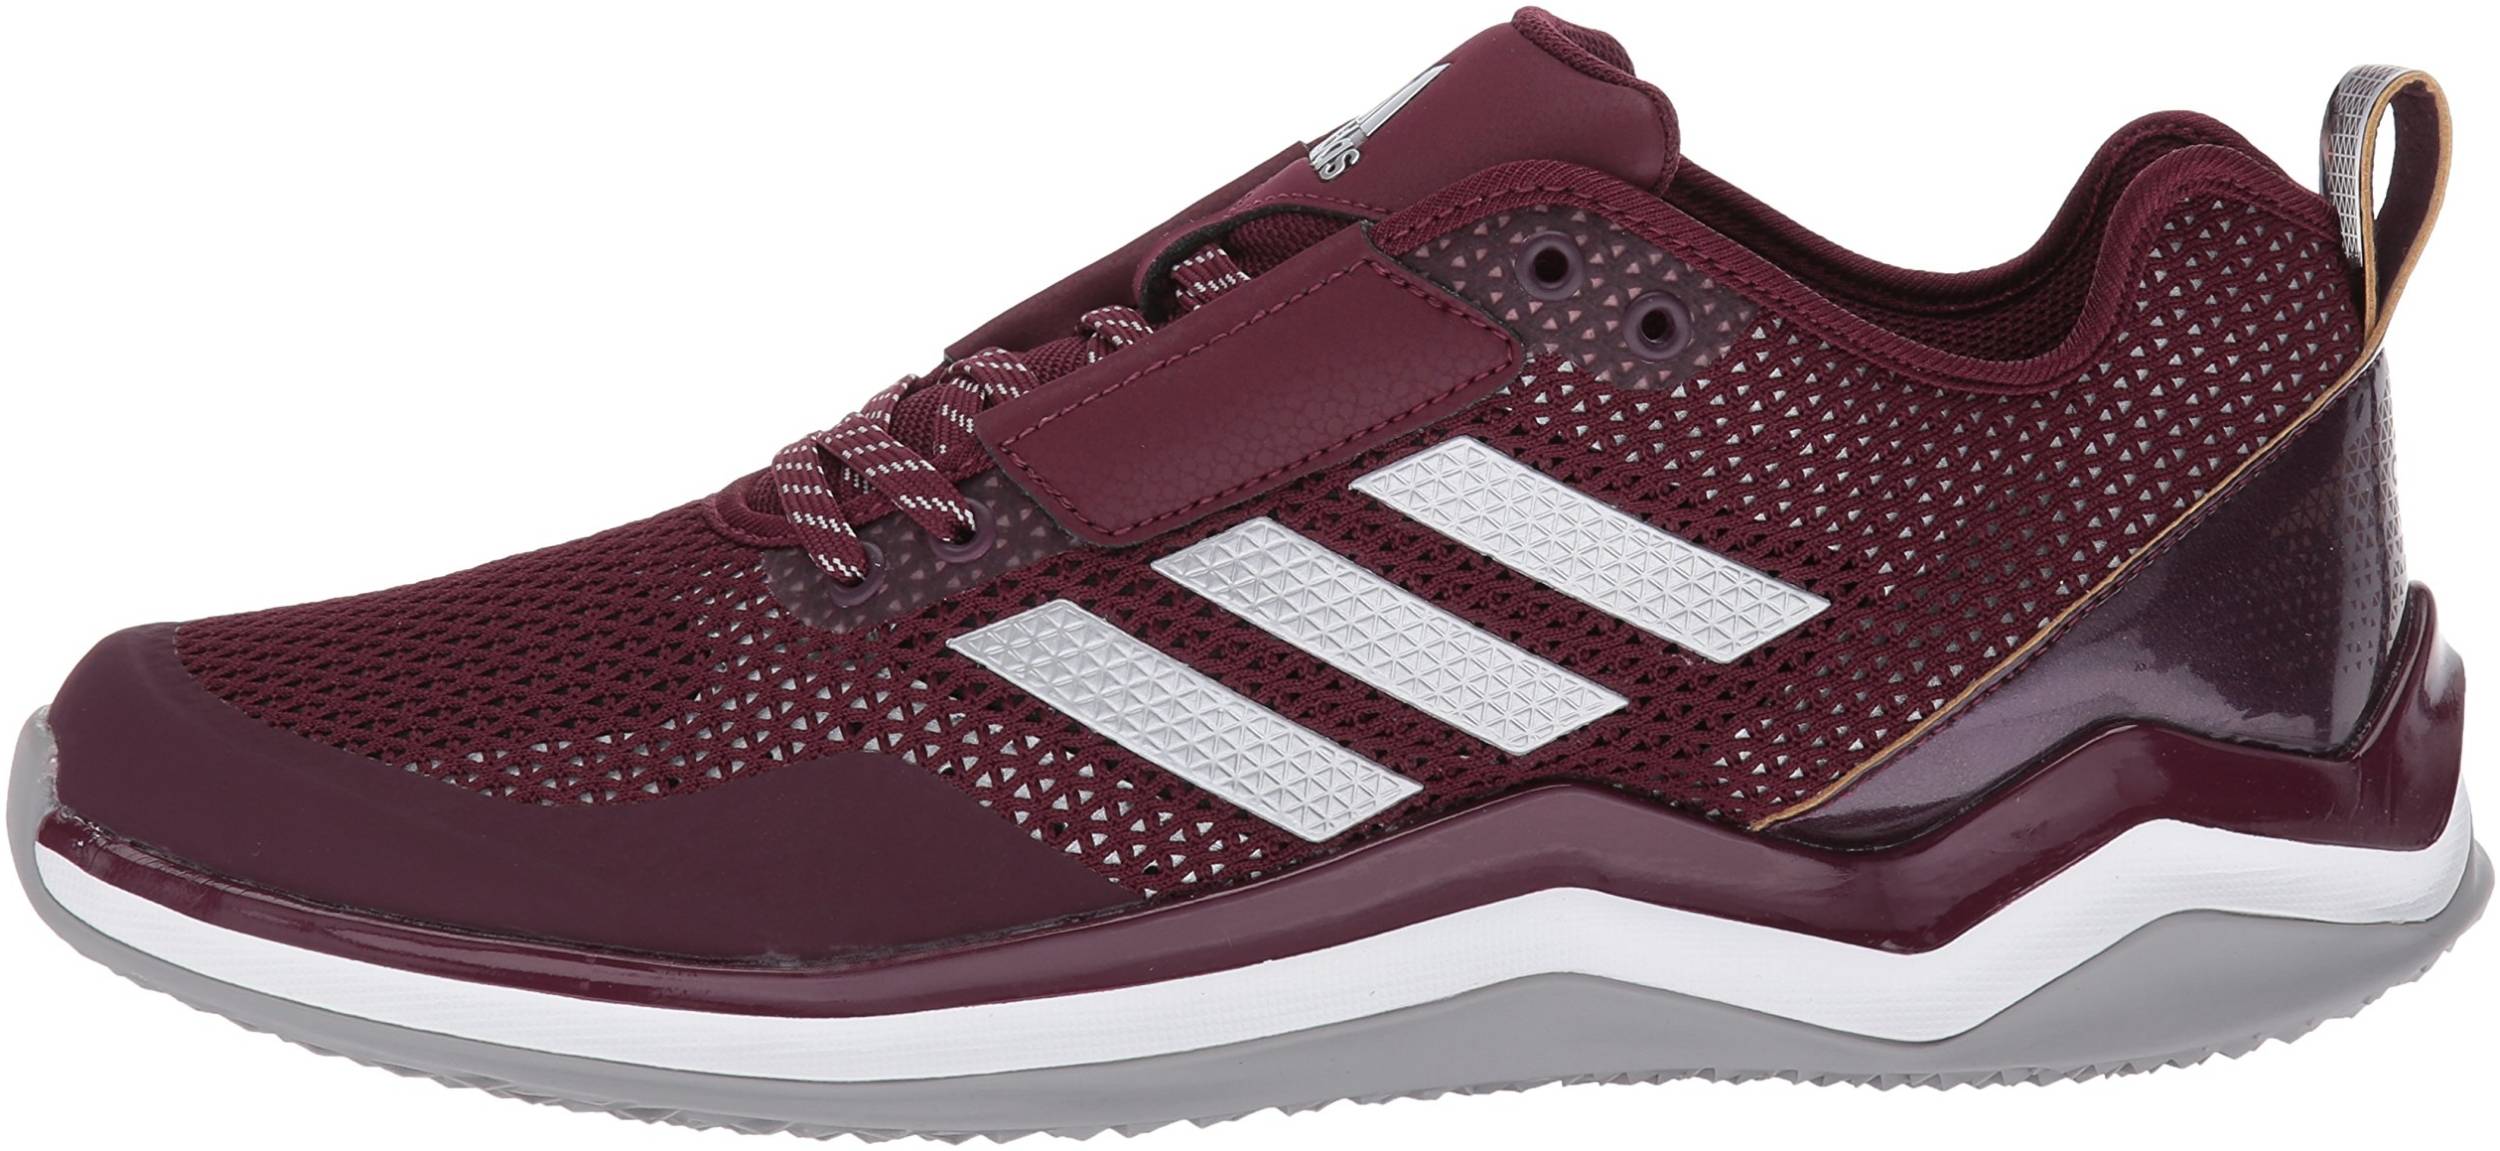 adidas men's speed trainer 3 shoes